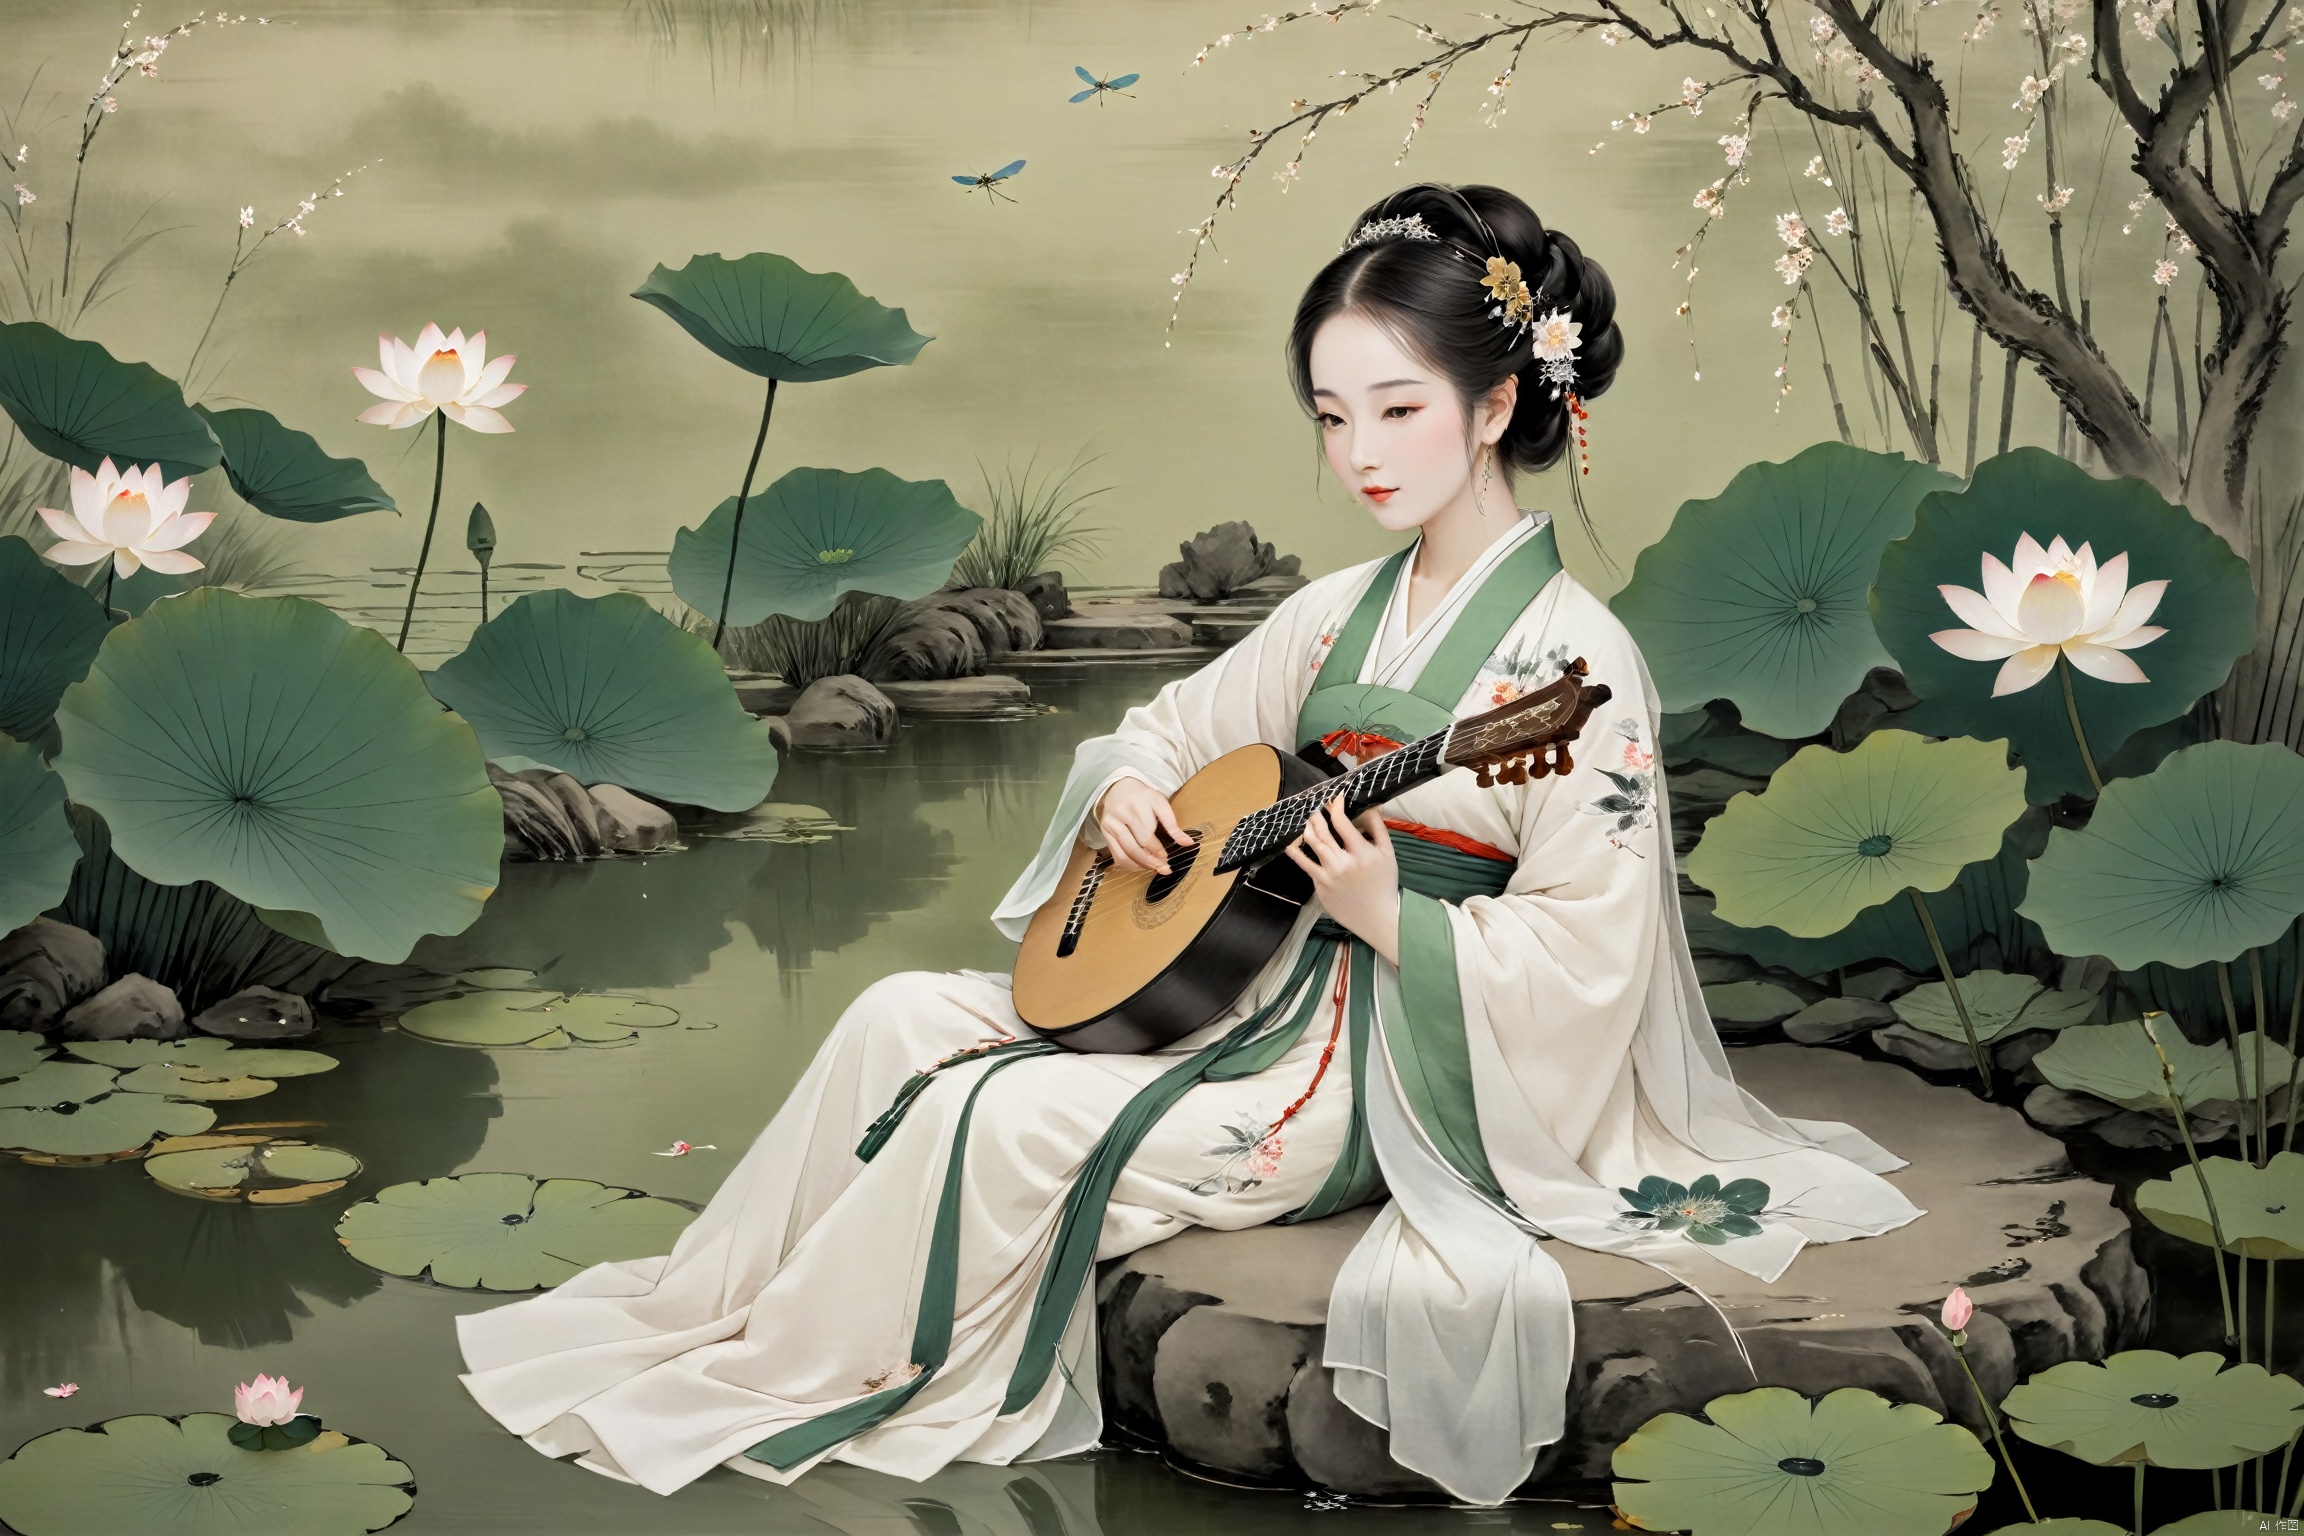 The woman, dressed in traditional Hanfu, sits on a green stone by the pond, gently strumming her biwa lute. The blooming lotus flowers and darting dragonflies complement the melodious notes of the pipa, creating a harmonious scene of movement and stillness., traditional chinese ink painting,black and white ink painting,willow branches